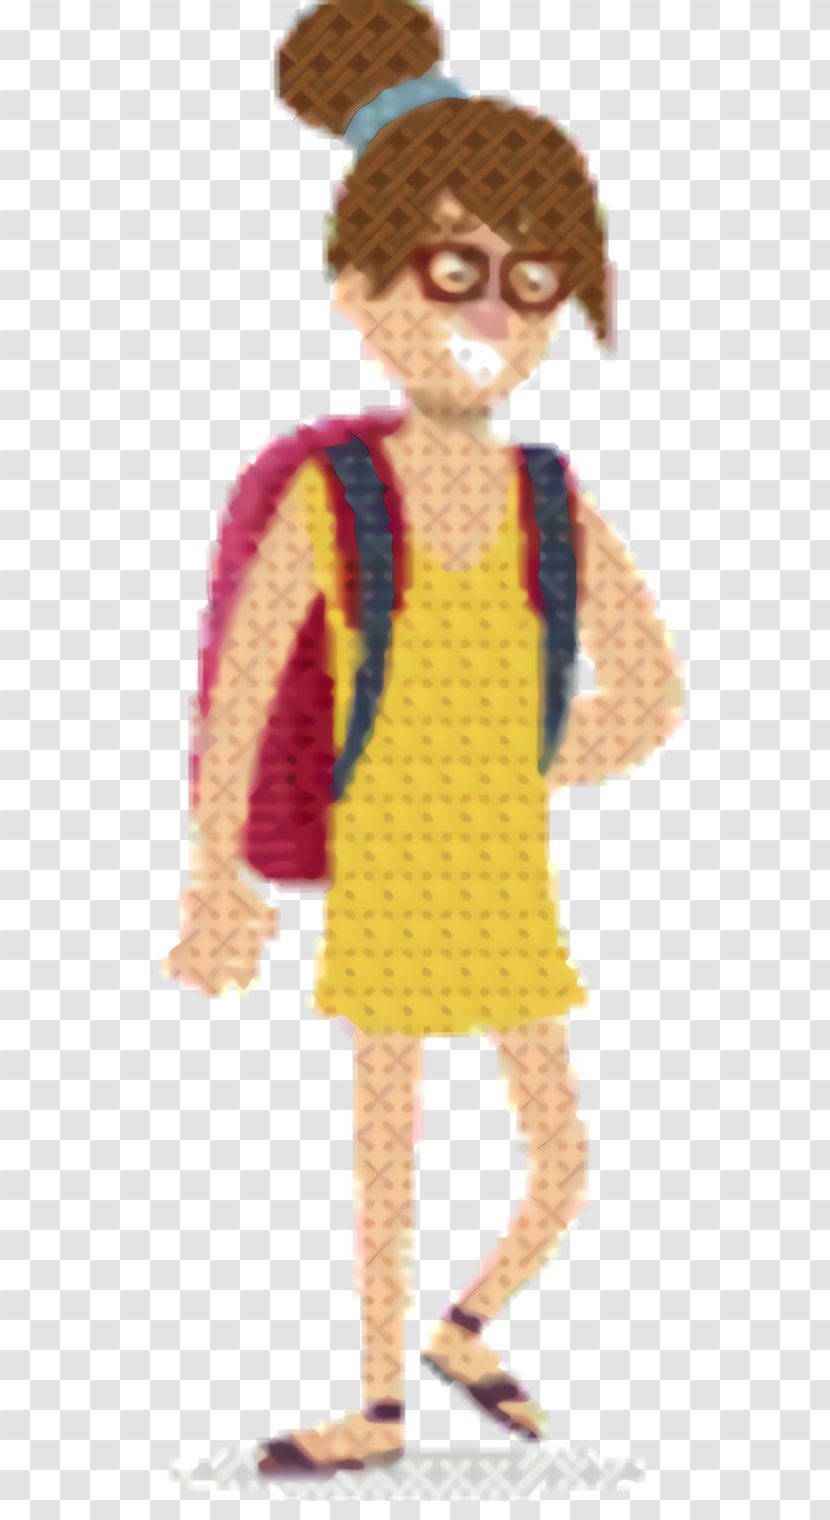 Yellow Background - Crochet Costume Transparent PNG